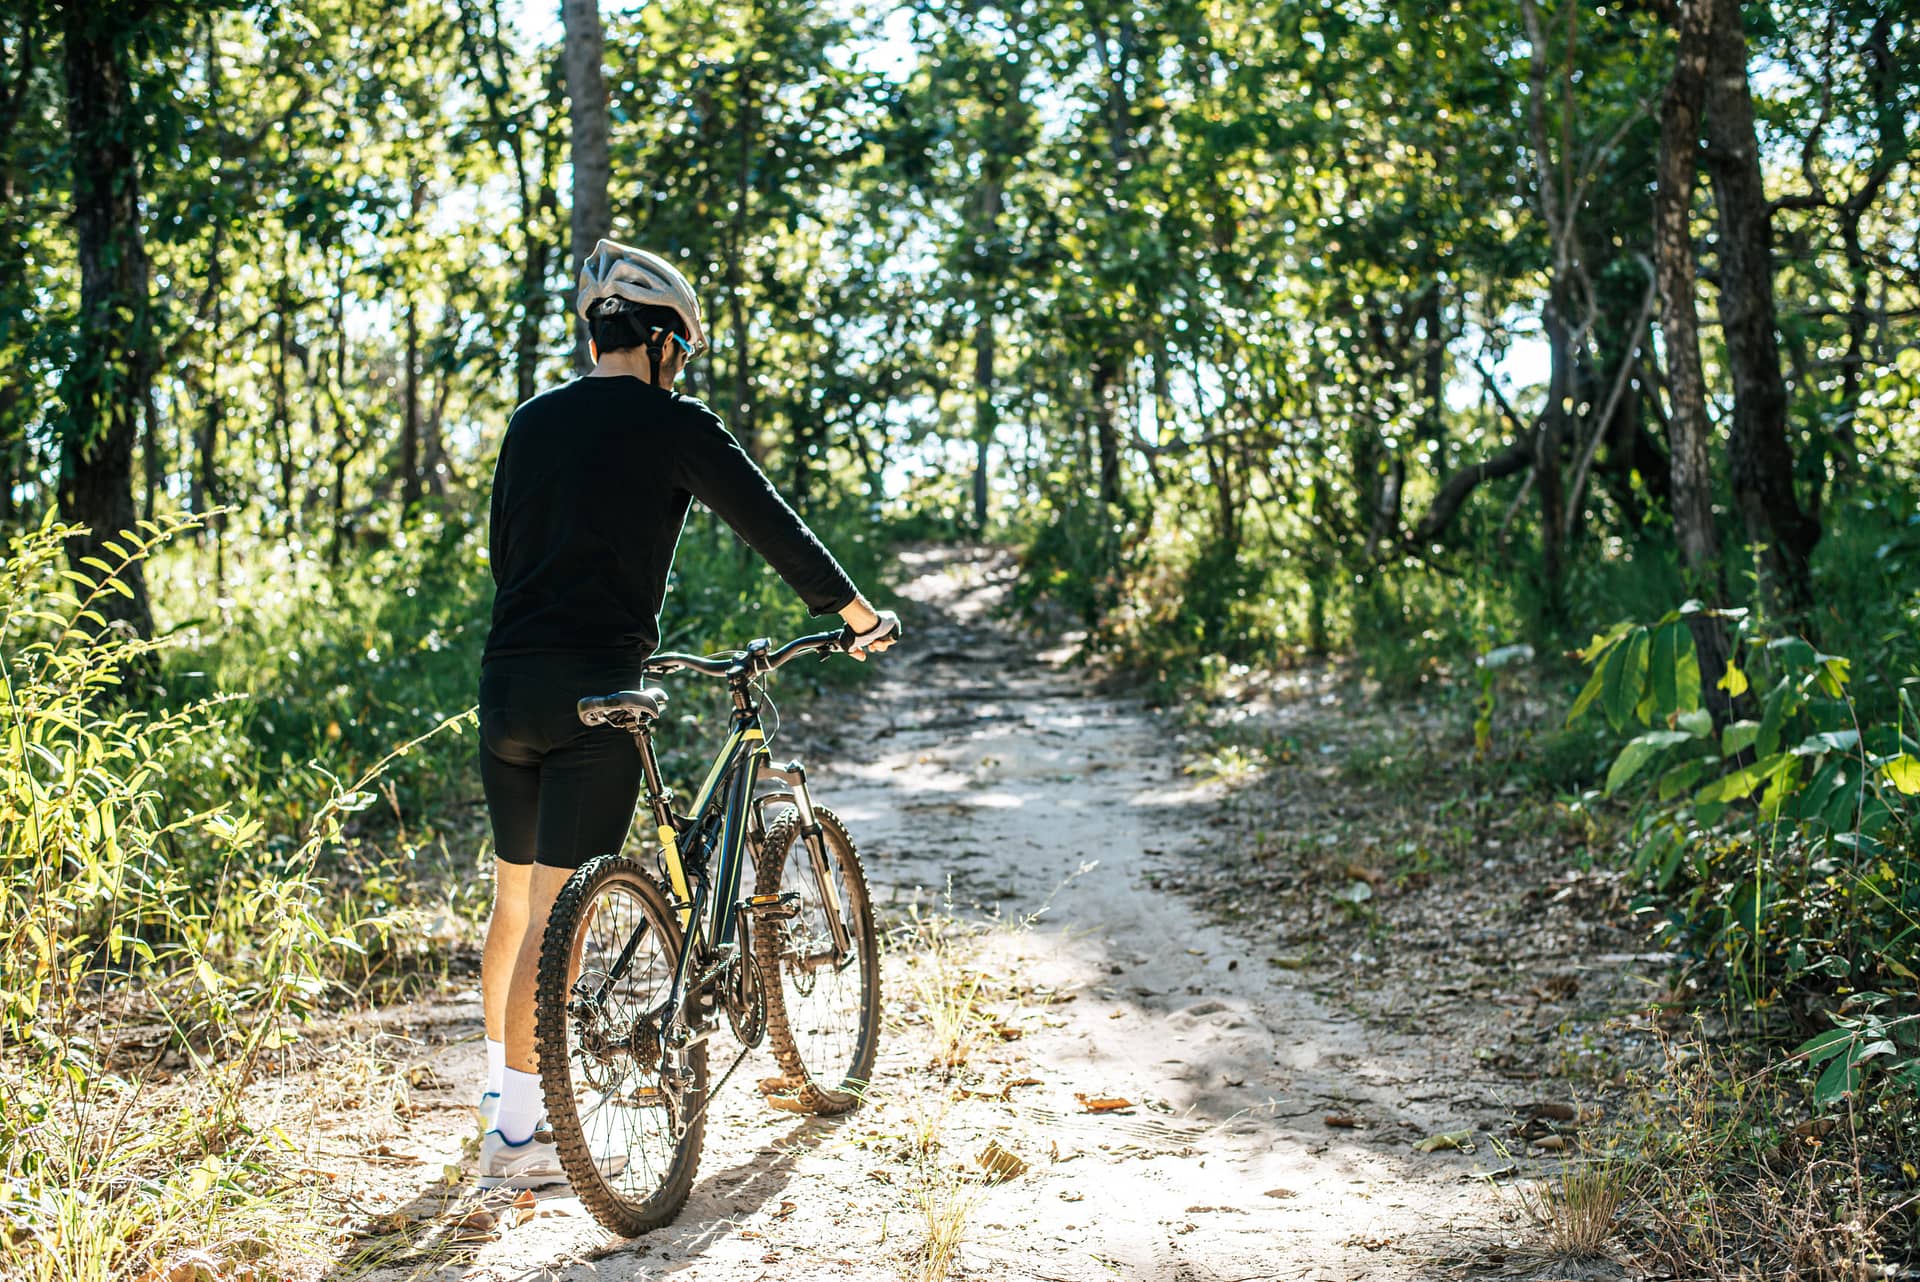 Bicycling Can Lead to Foot Injuries  Greater Washington Advanced Podiatry,  LLC